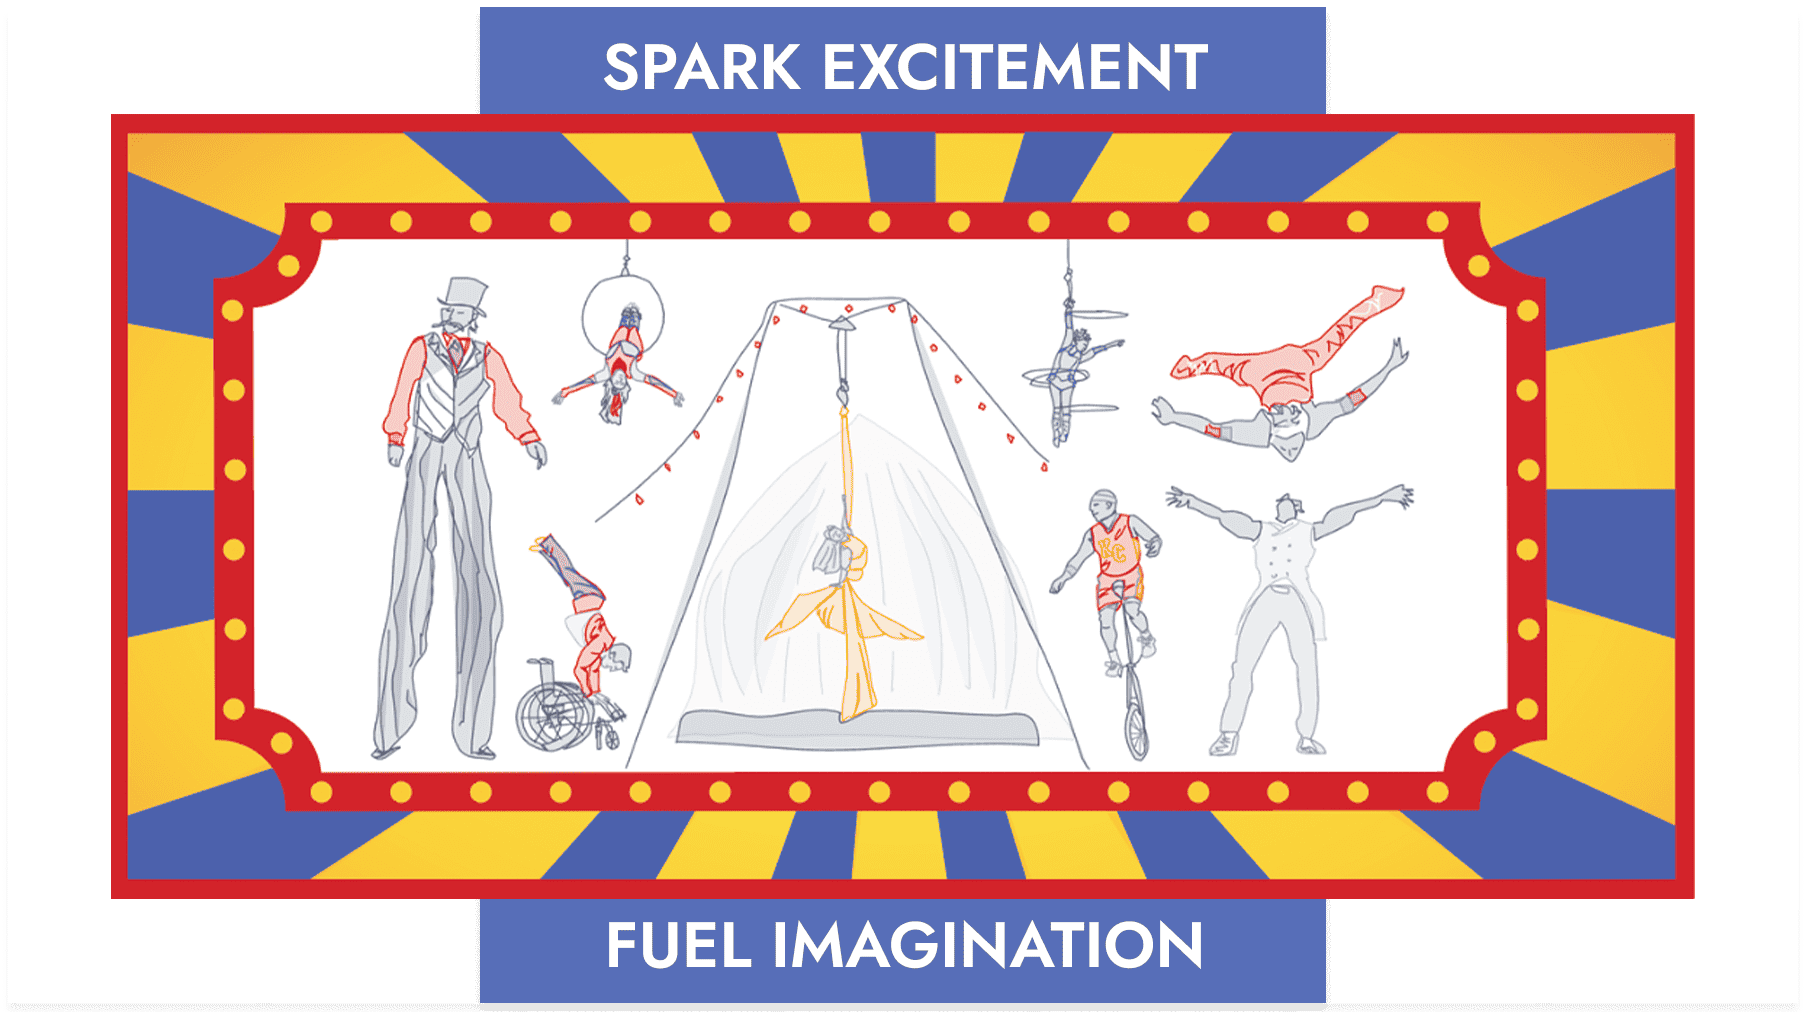 "Spark Excitement, Fuel Imagination" banner ad with circus illustrations